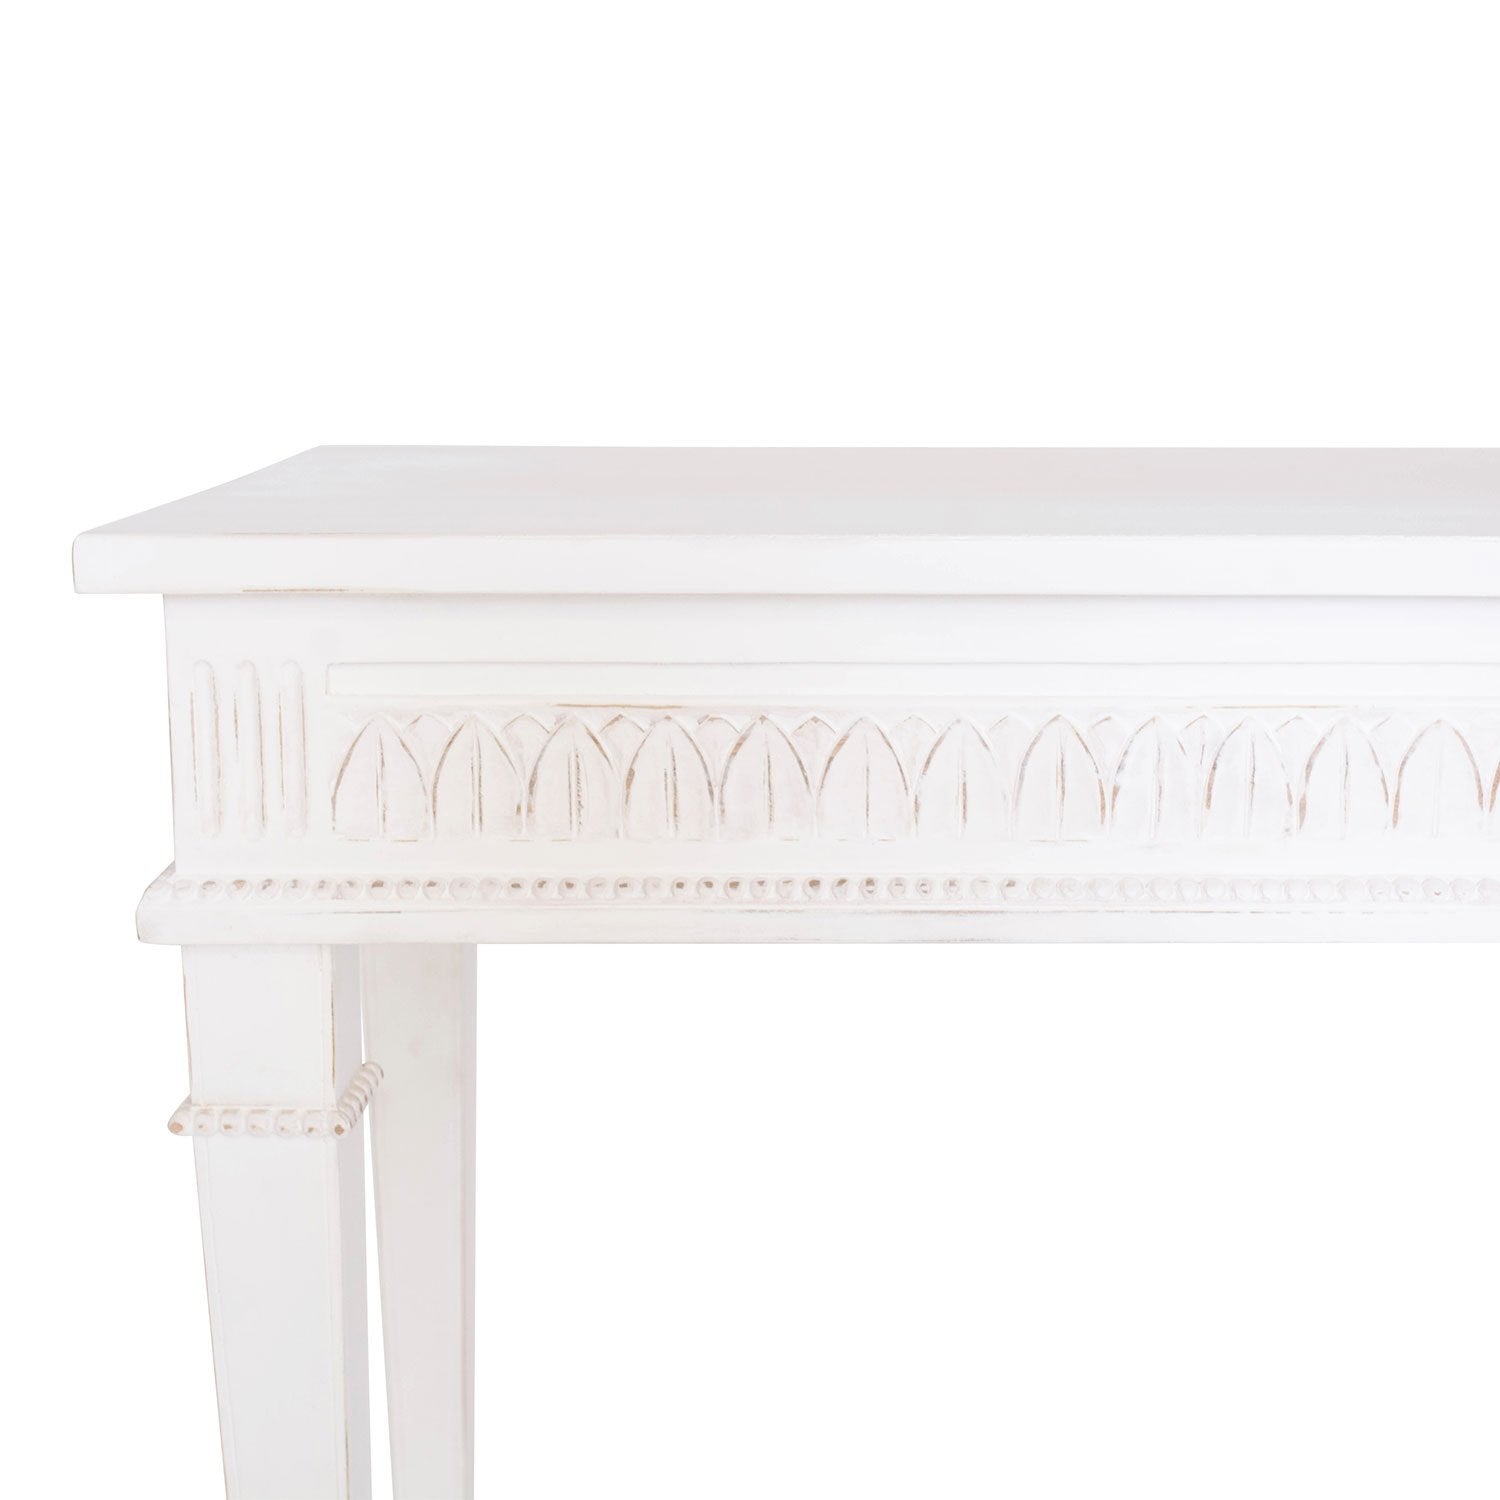 Carved Details on White Camilla Console